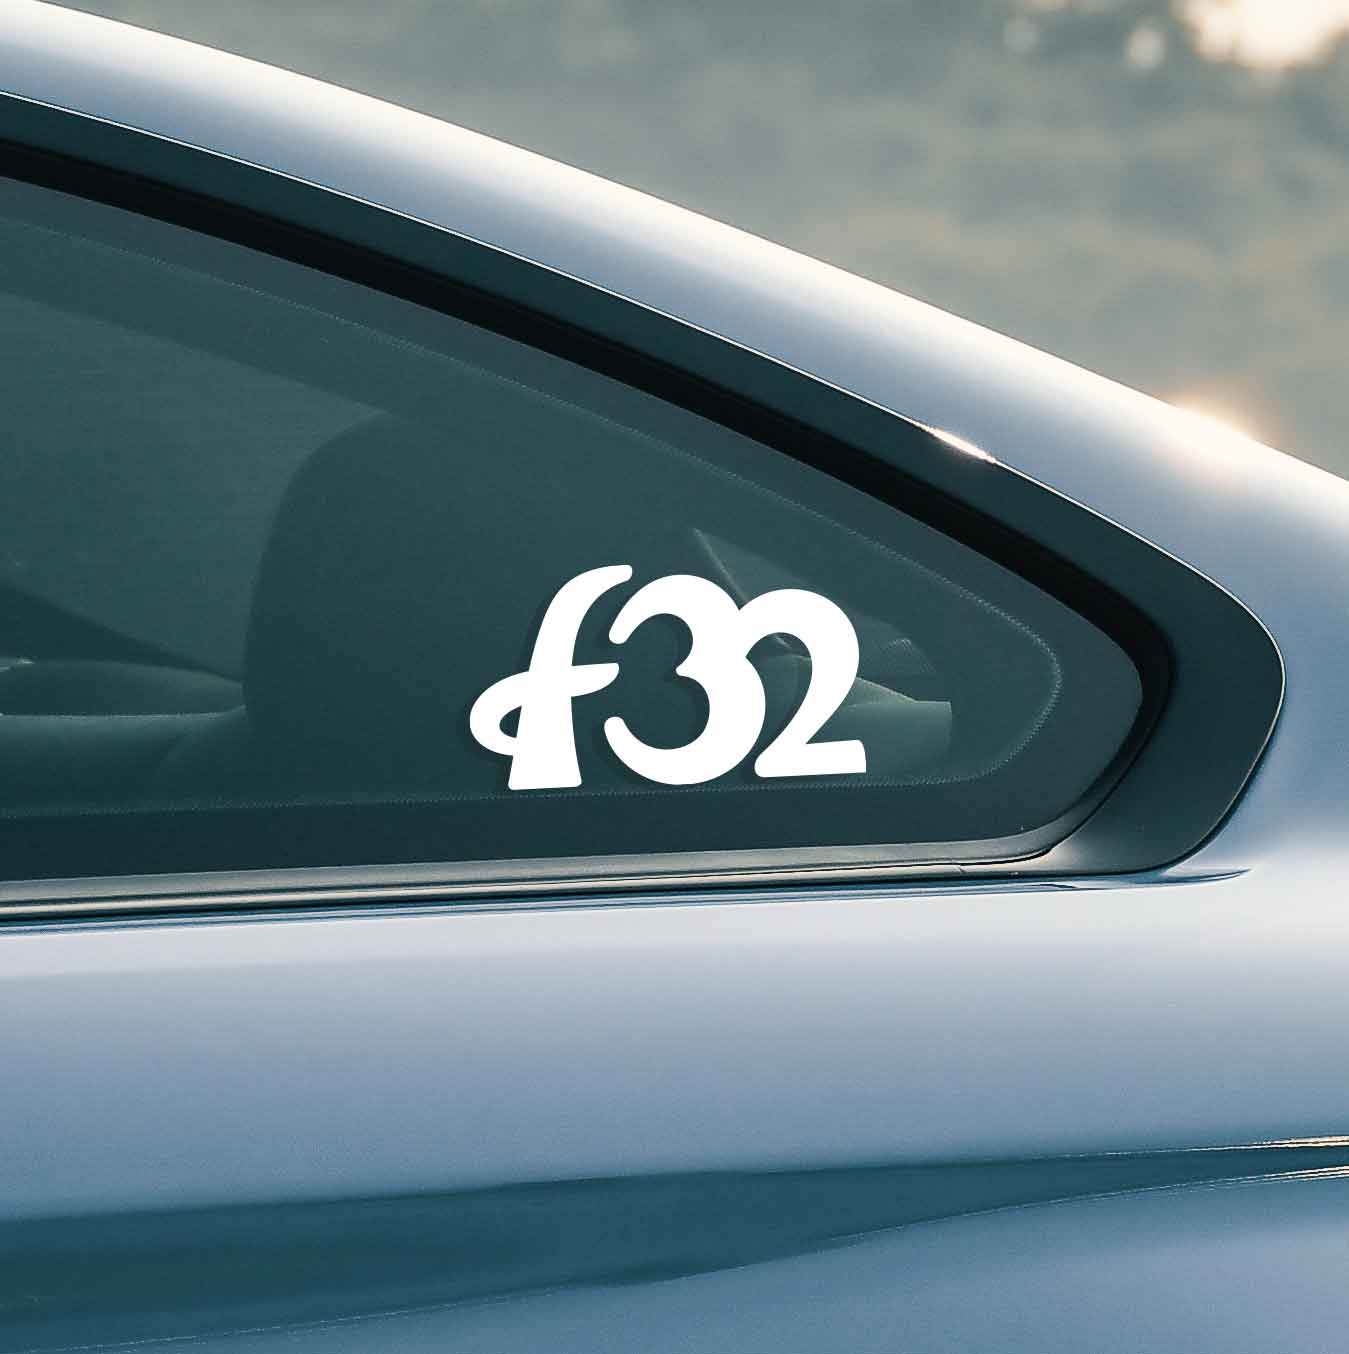 Sticker for BMW f32. Available in different colors. Contour cut from premium outdoor vinyls. Never fades out.